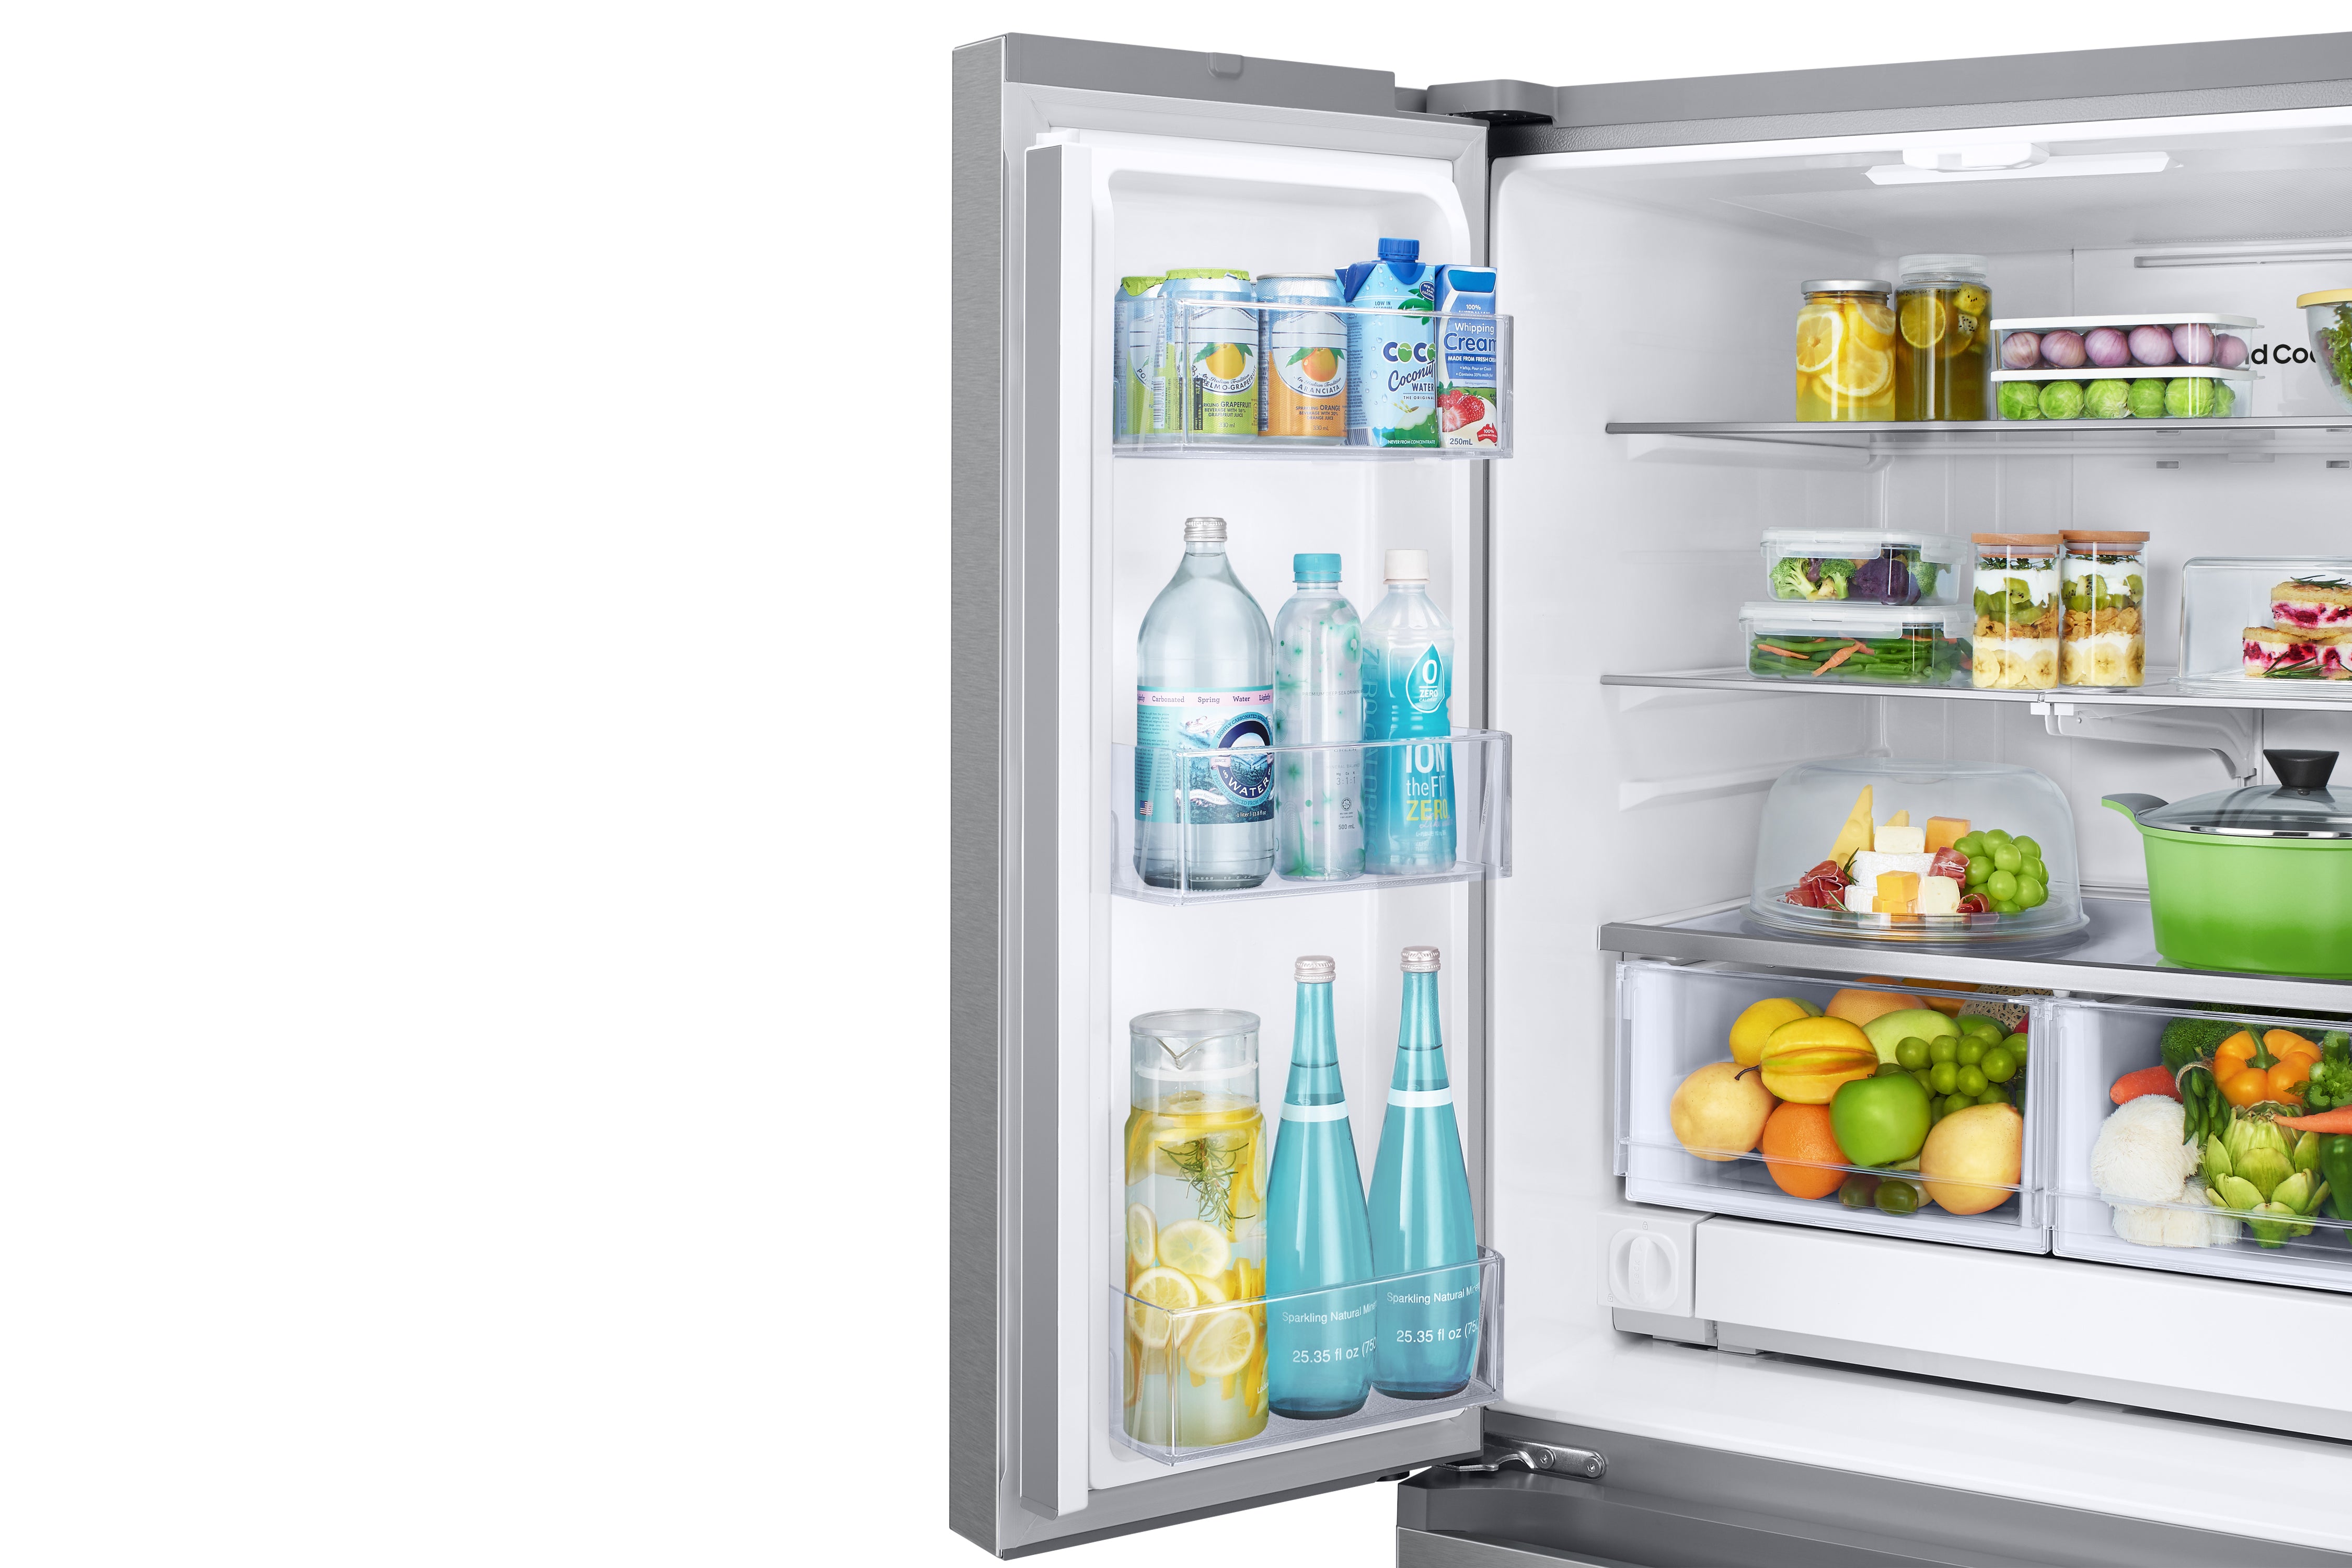 Samsung - 32.1875 Inch 24.5 cu. ft French Door Refrigerator in Stainless - RF25C5151SR